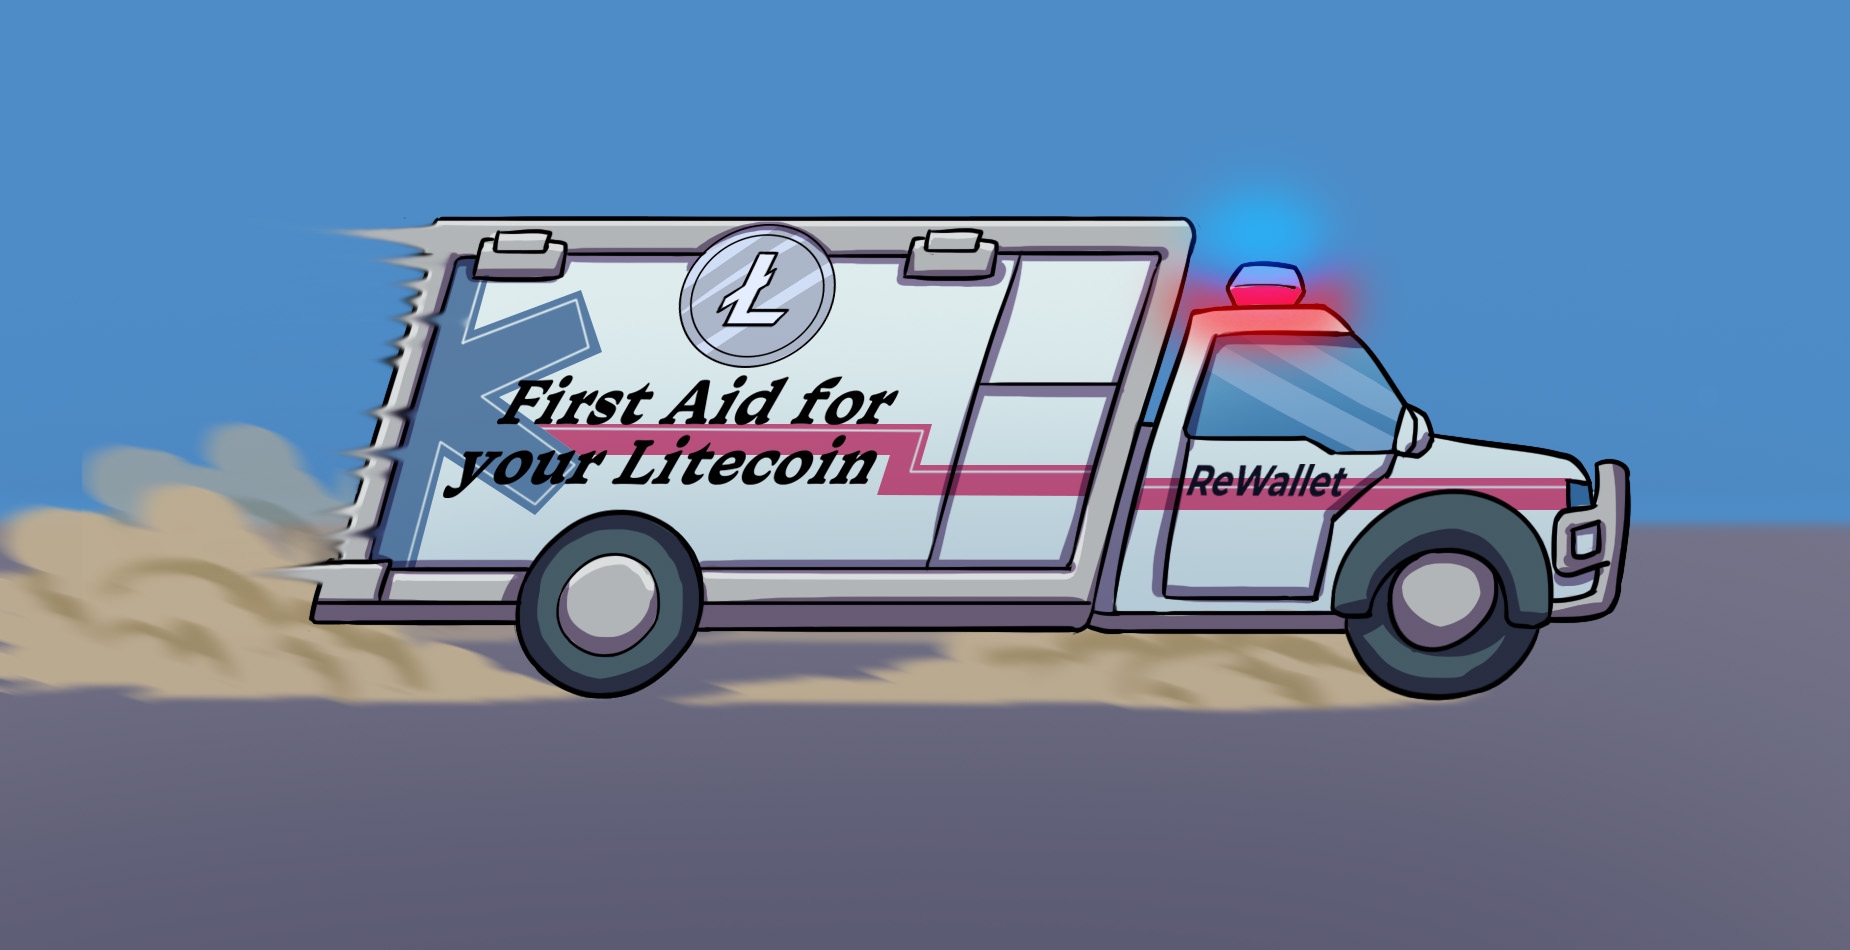 An ambulance depicting Litecoin Core Recovery with sirens turned on.